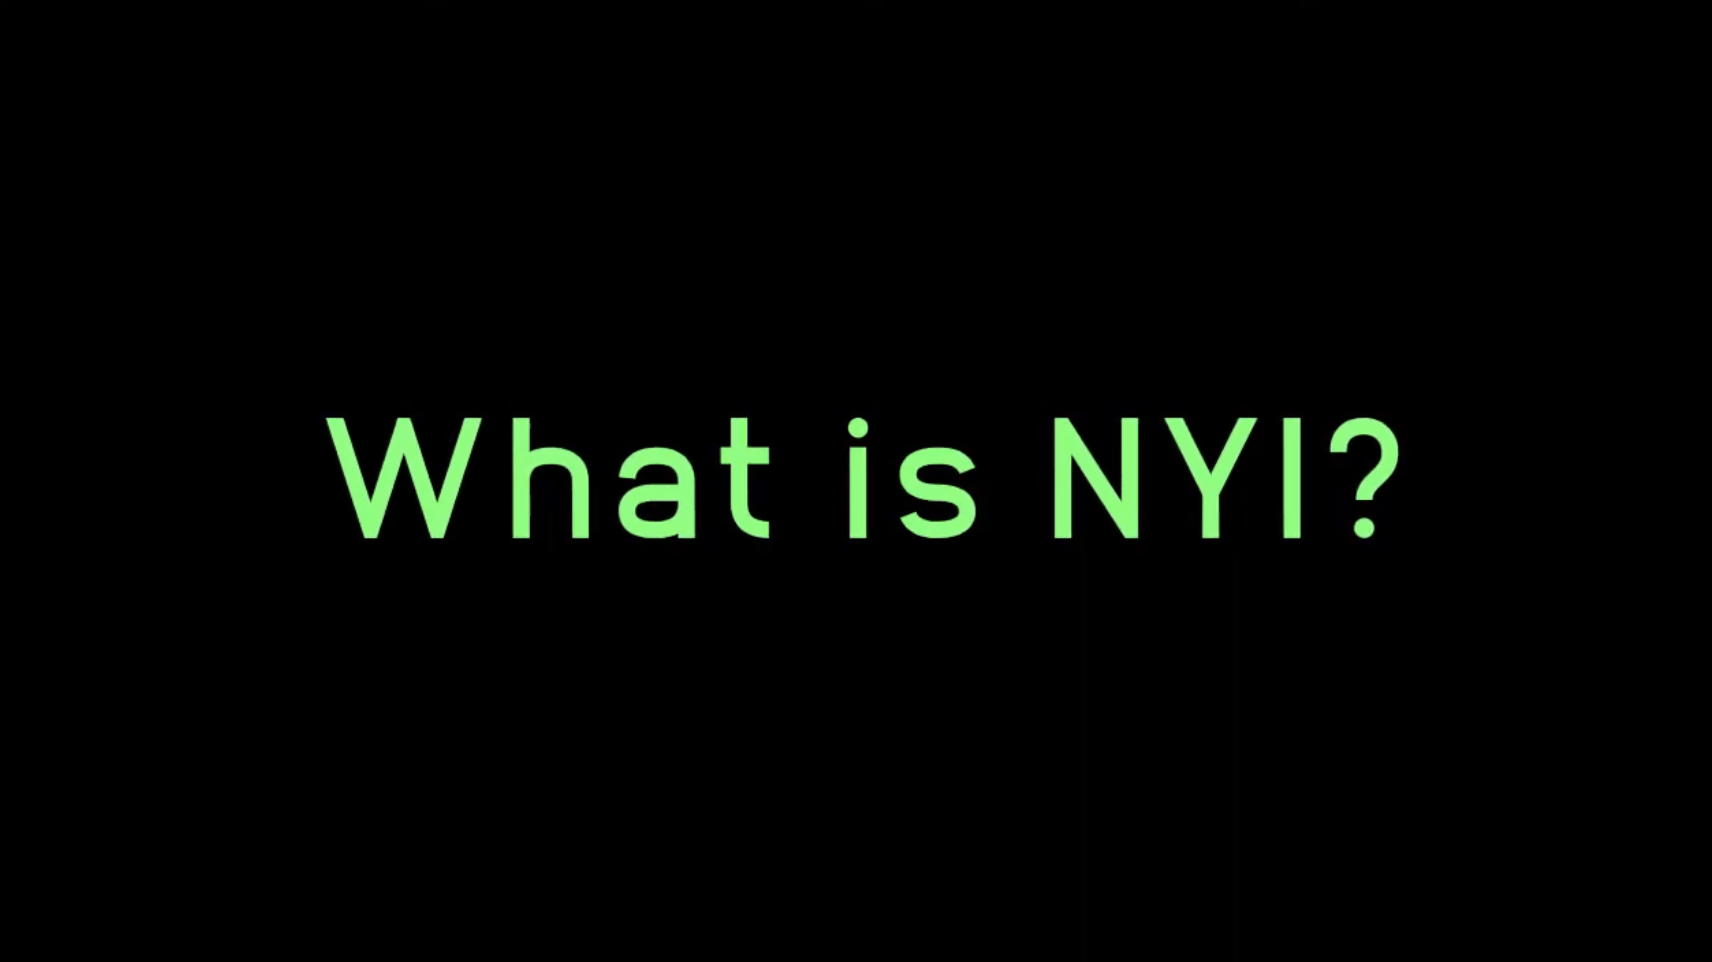 What is NYI?